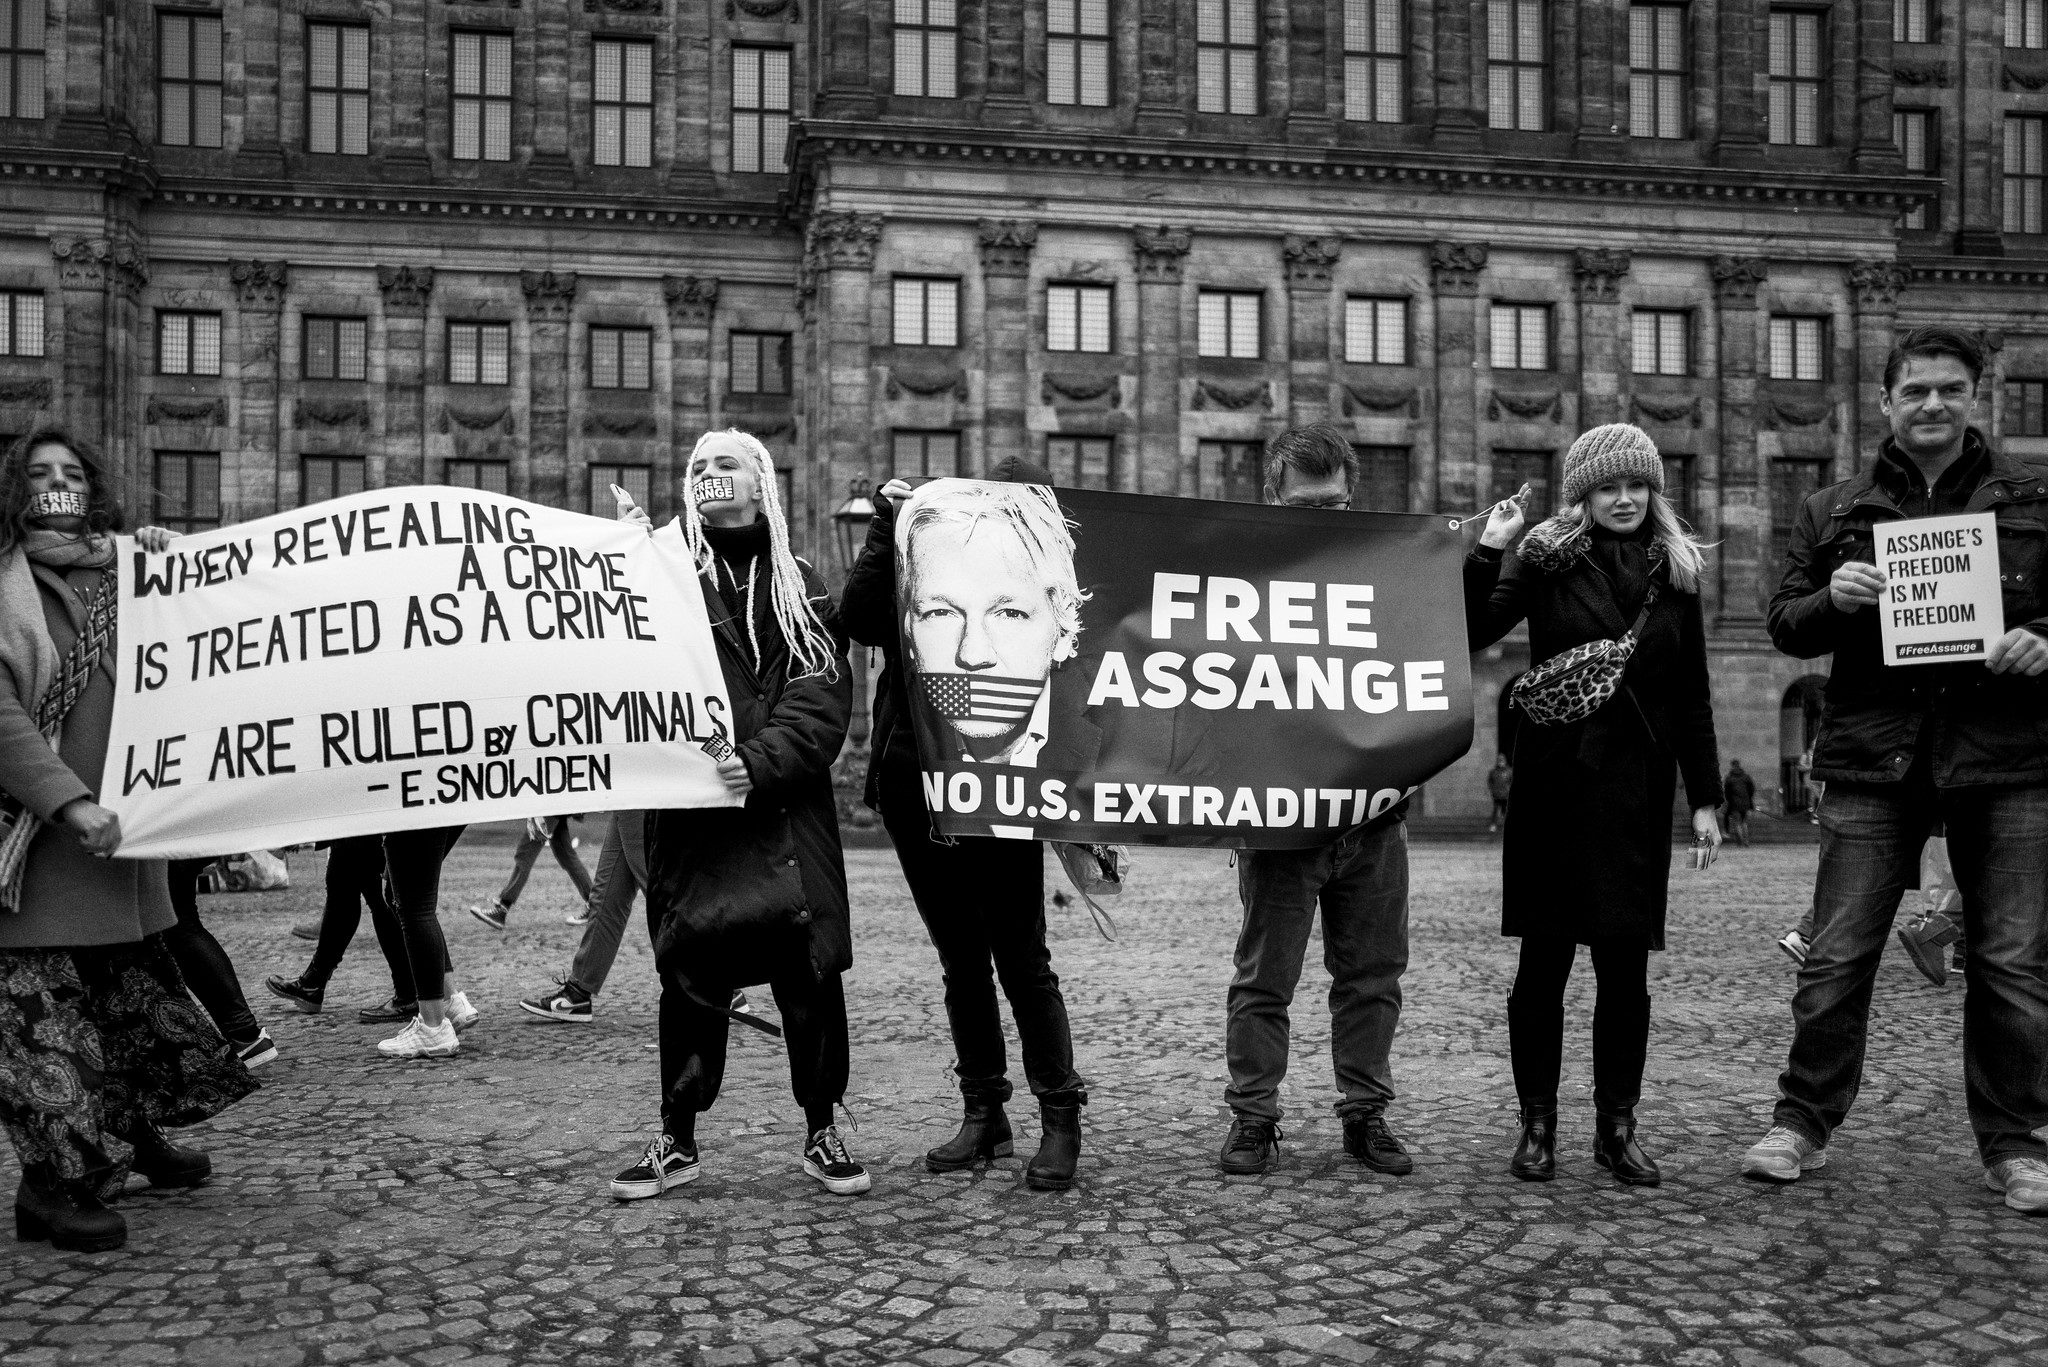 A group of people outside holding signs supporting Julian Assange, including one that says "Free Assange, no U.S. extradition"